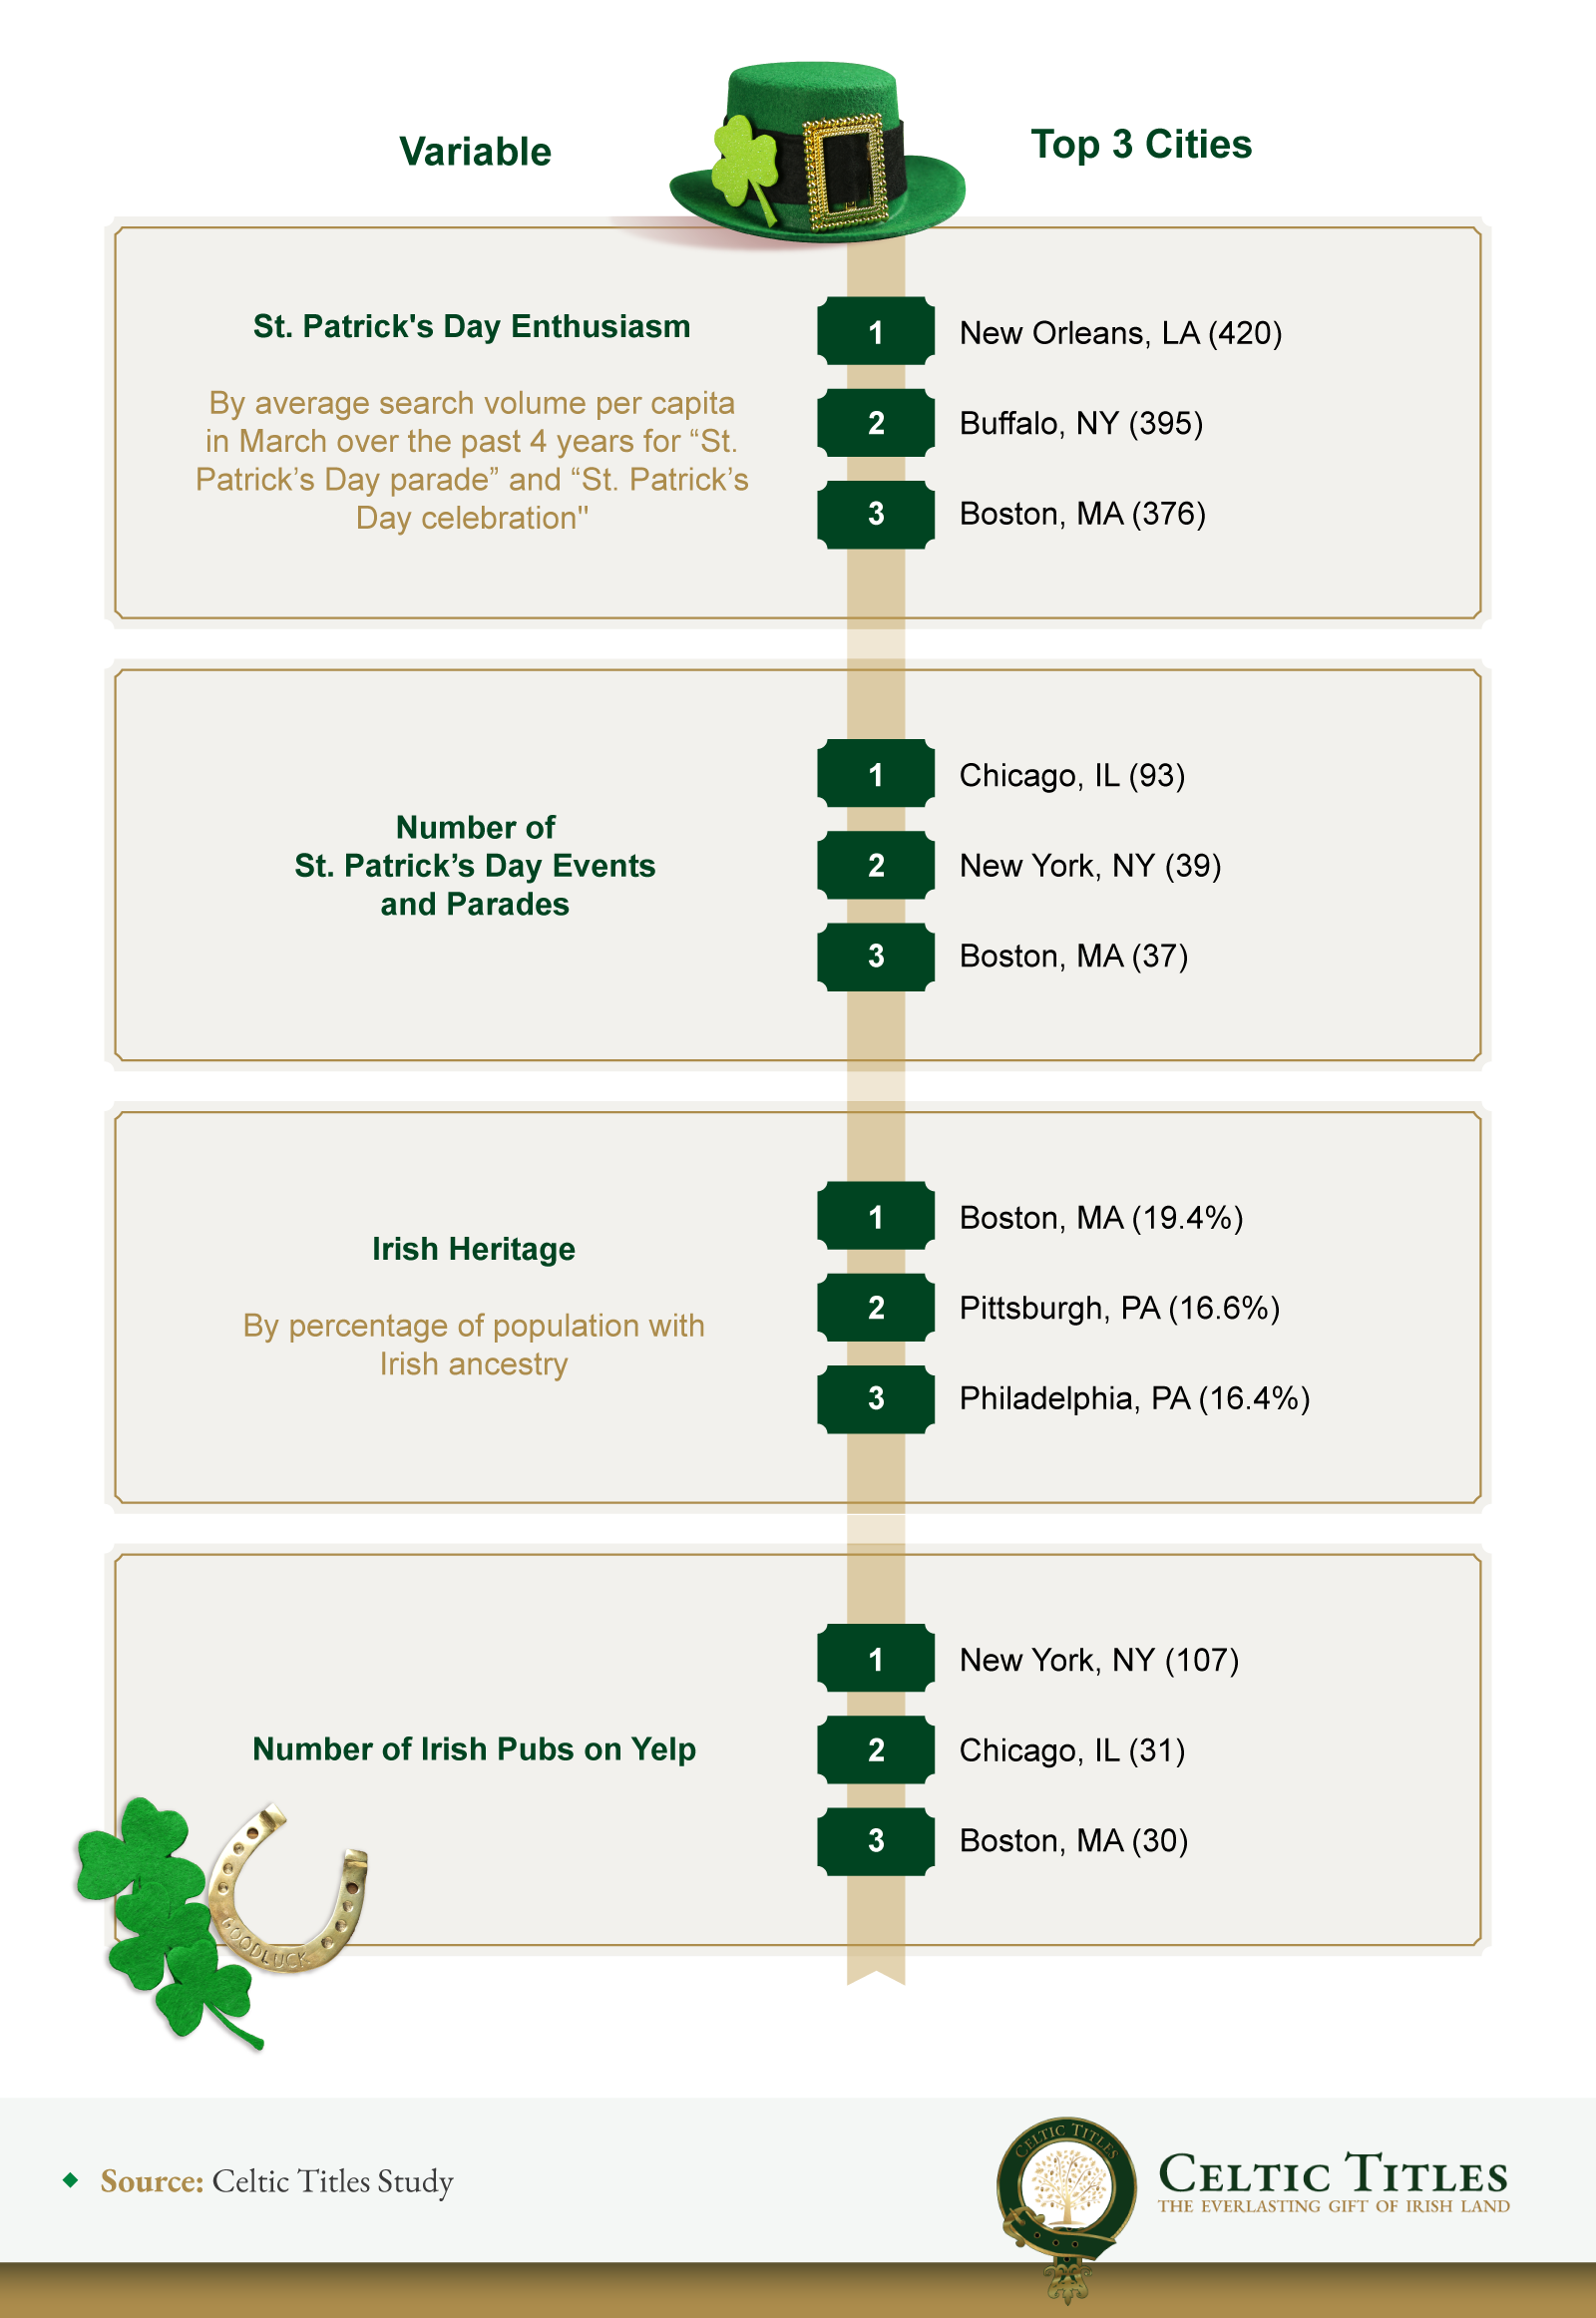 Infographic showing the top 3 cities for each St. Patrick's Day variable.